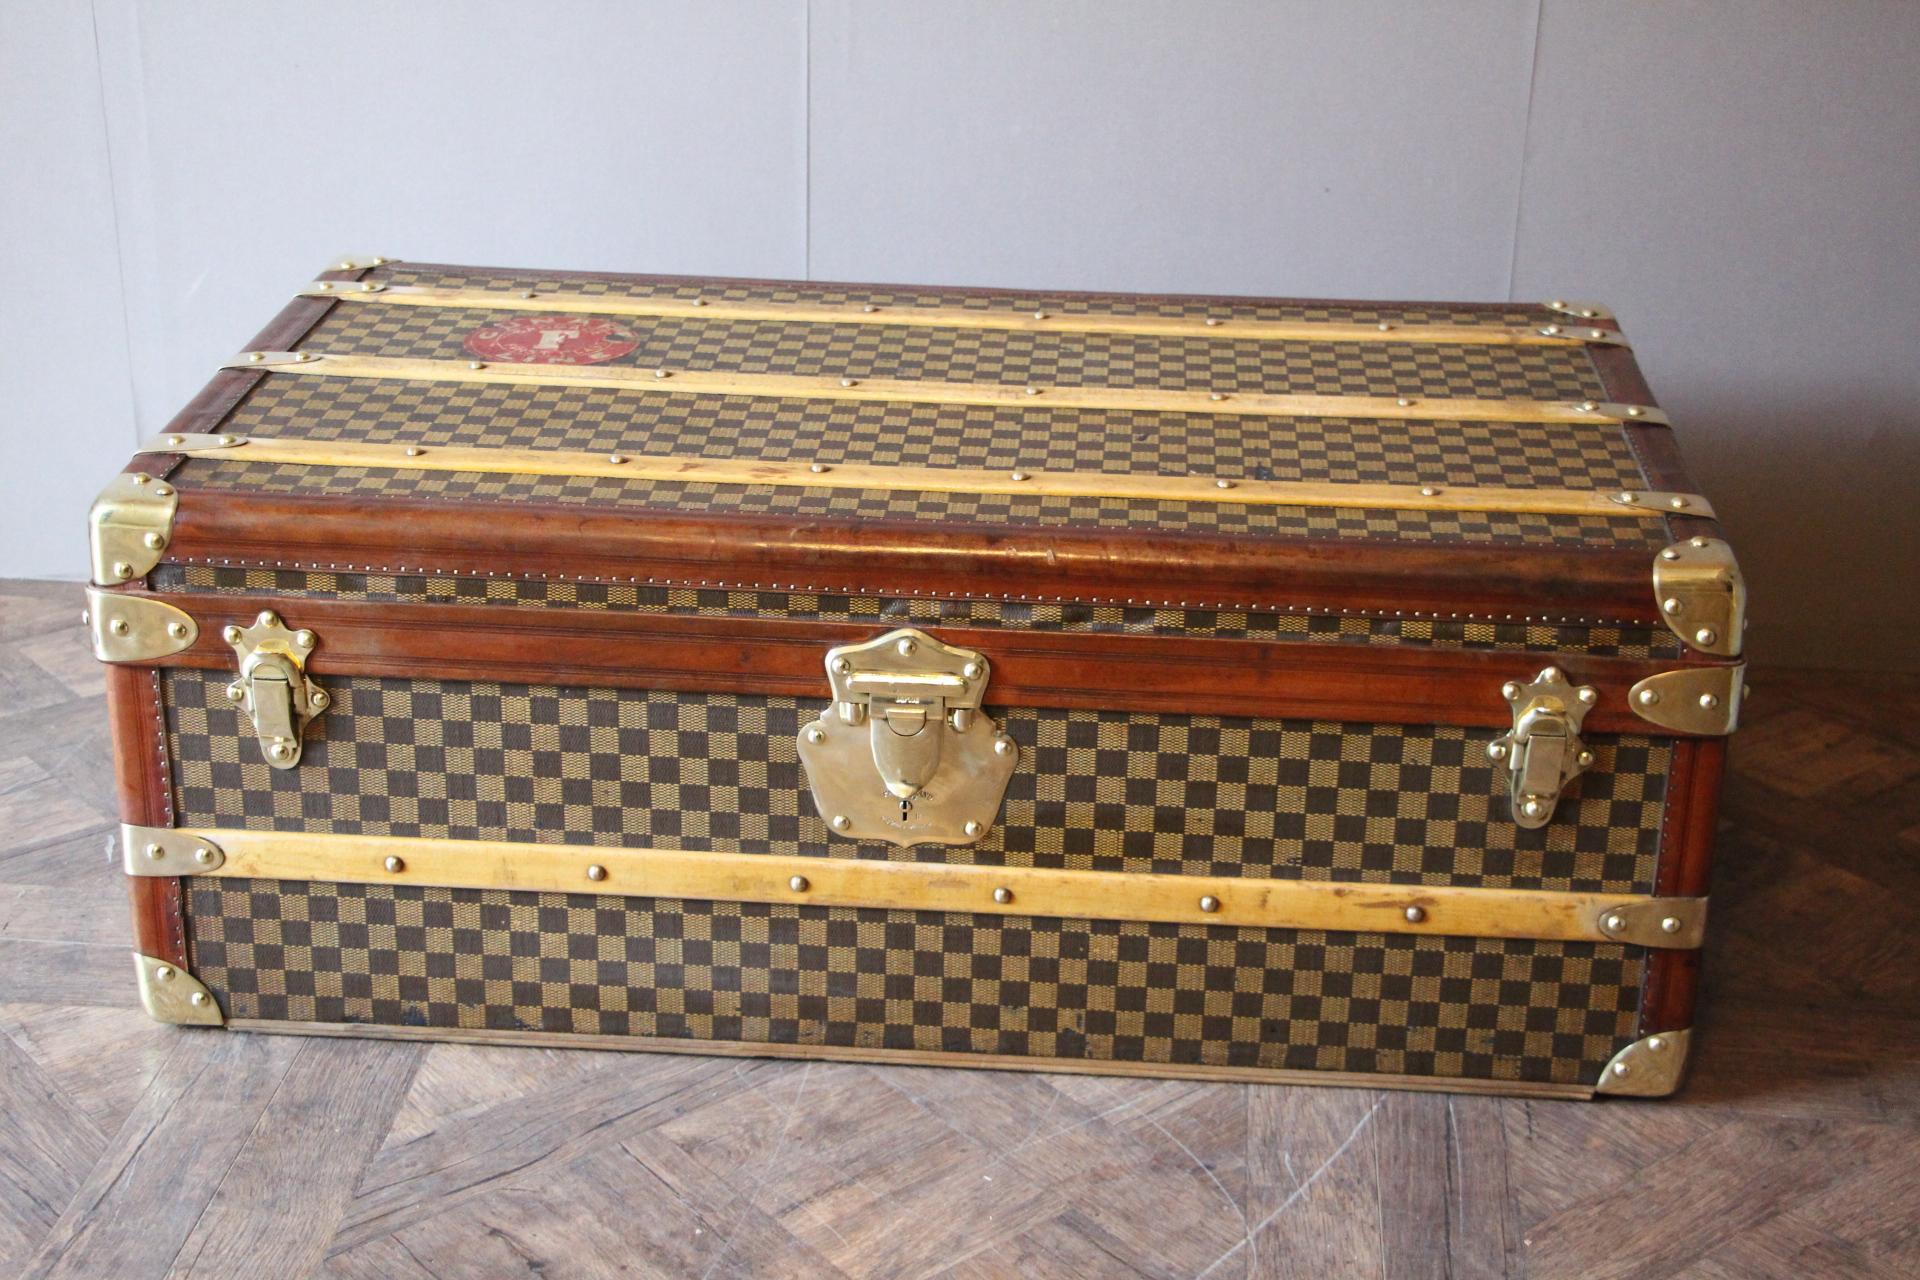 Very unusual and magnificent French steamer trunk in checkers canvas, it features leather trim, solid brass corners, clasps and side handles as well as 